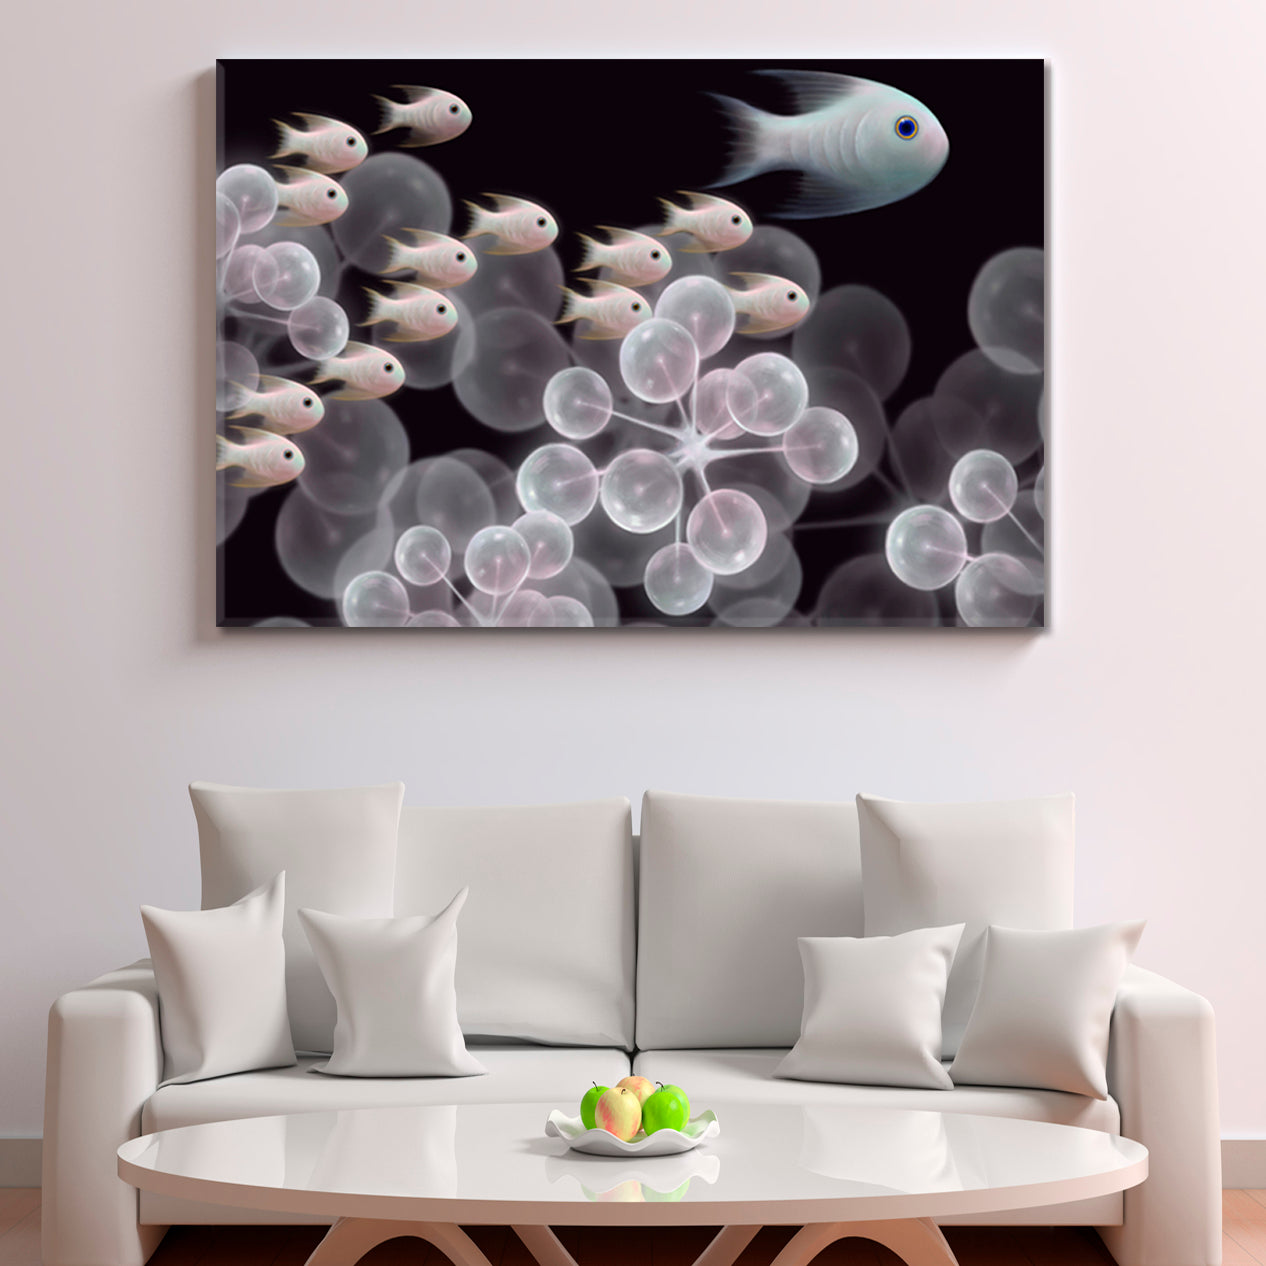 INNER UNIVERSE Live Organism Molecules And Schooling Fish Abstract Fantasy Nautical, Sea Life Pattern Art Artesty   